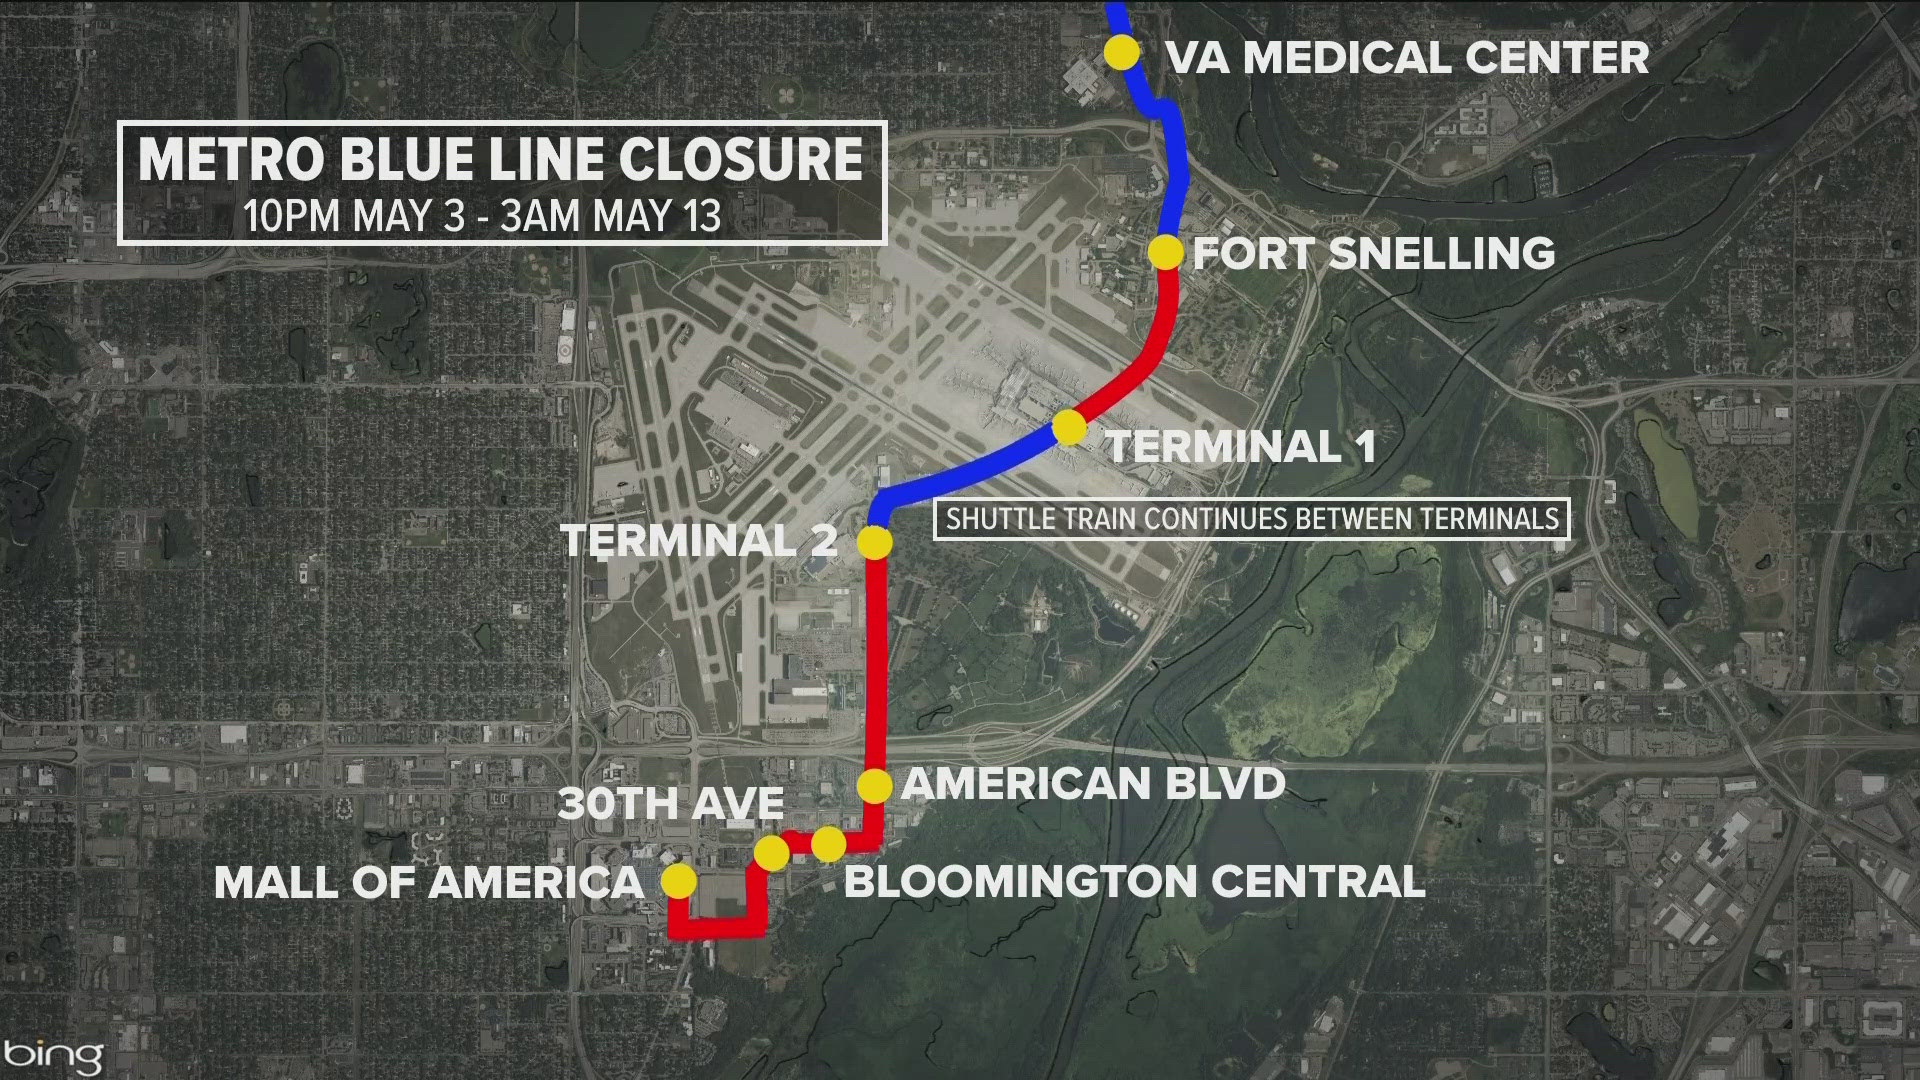 The ten-day closure begins Friday, May 3 at 10 p.m., with light rail trains replaced by bus service between Fort Snelling and Mall of America.